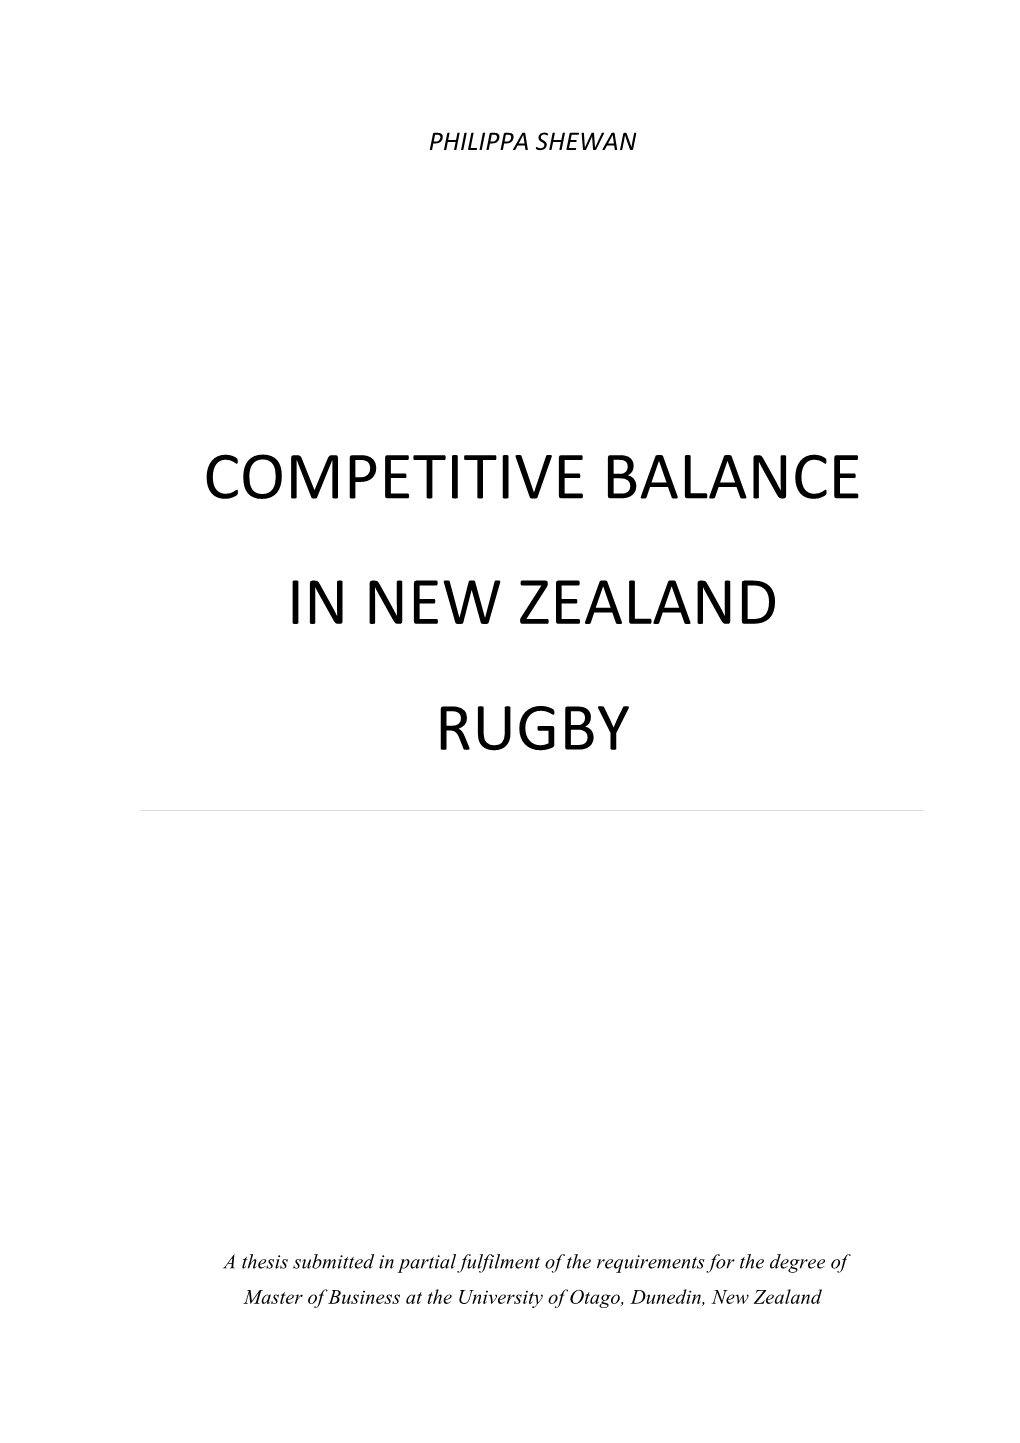 Competitive Balance in New Zealand Rugby